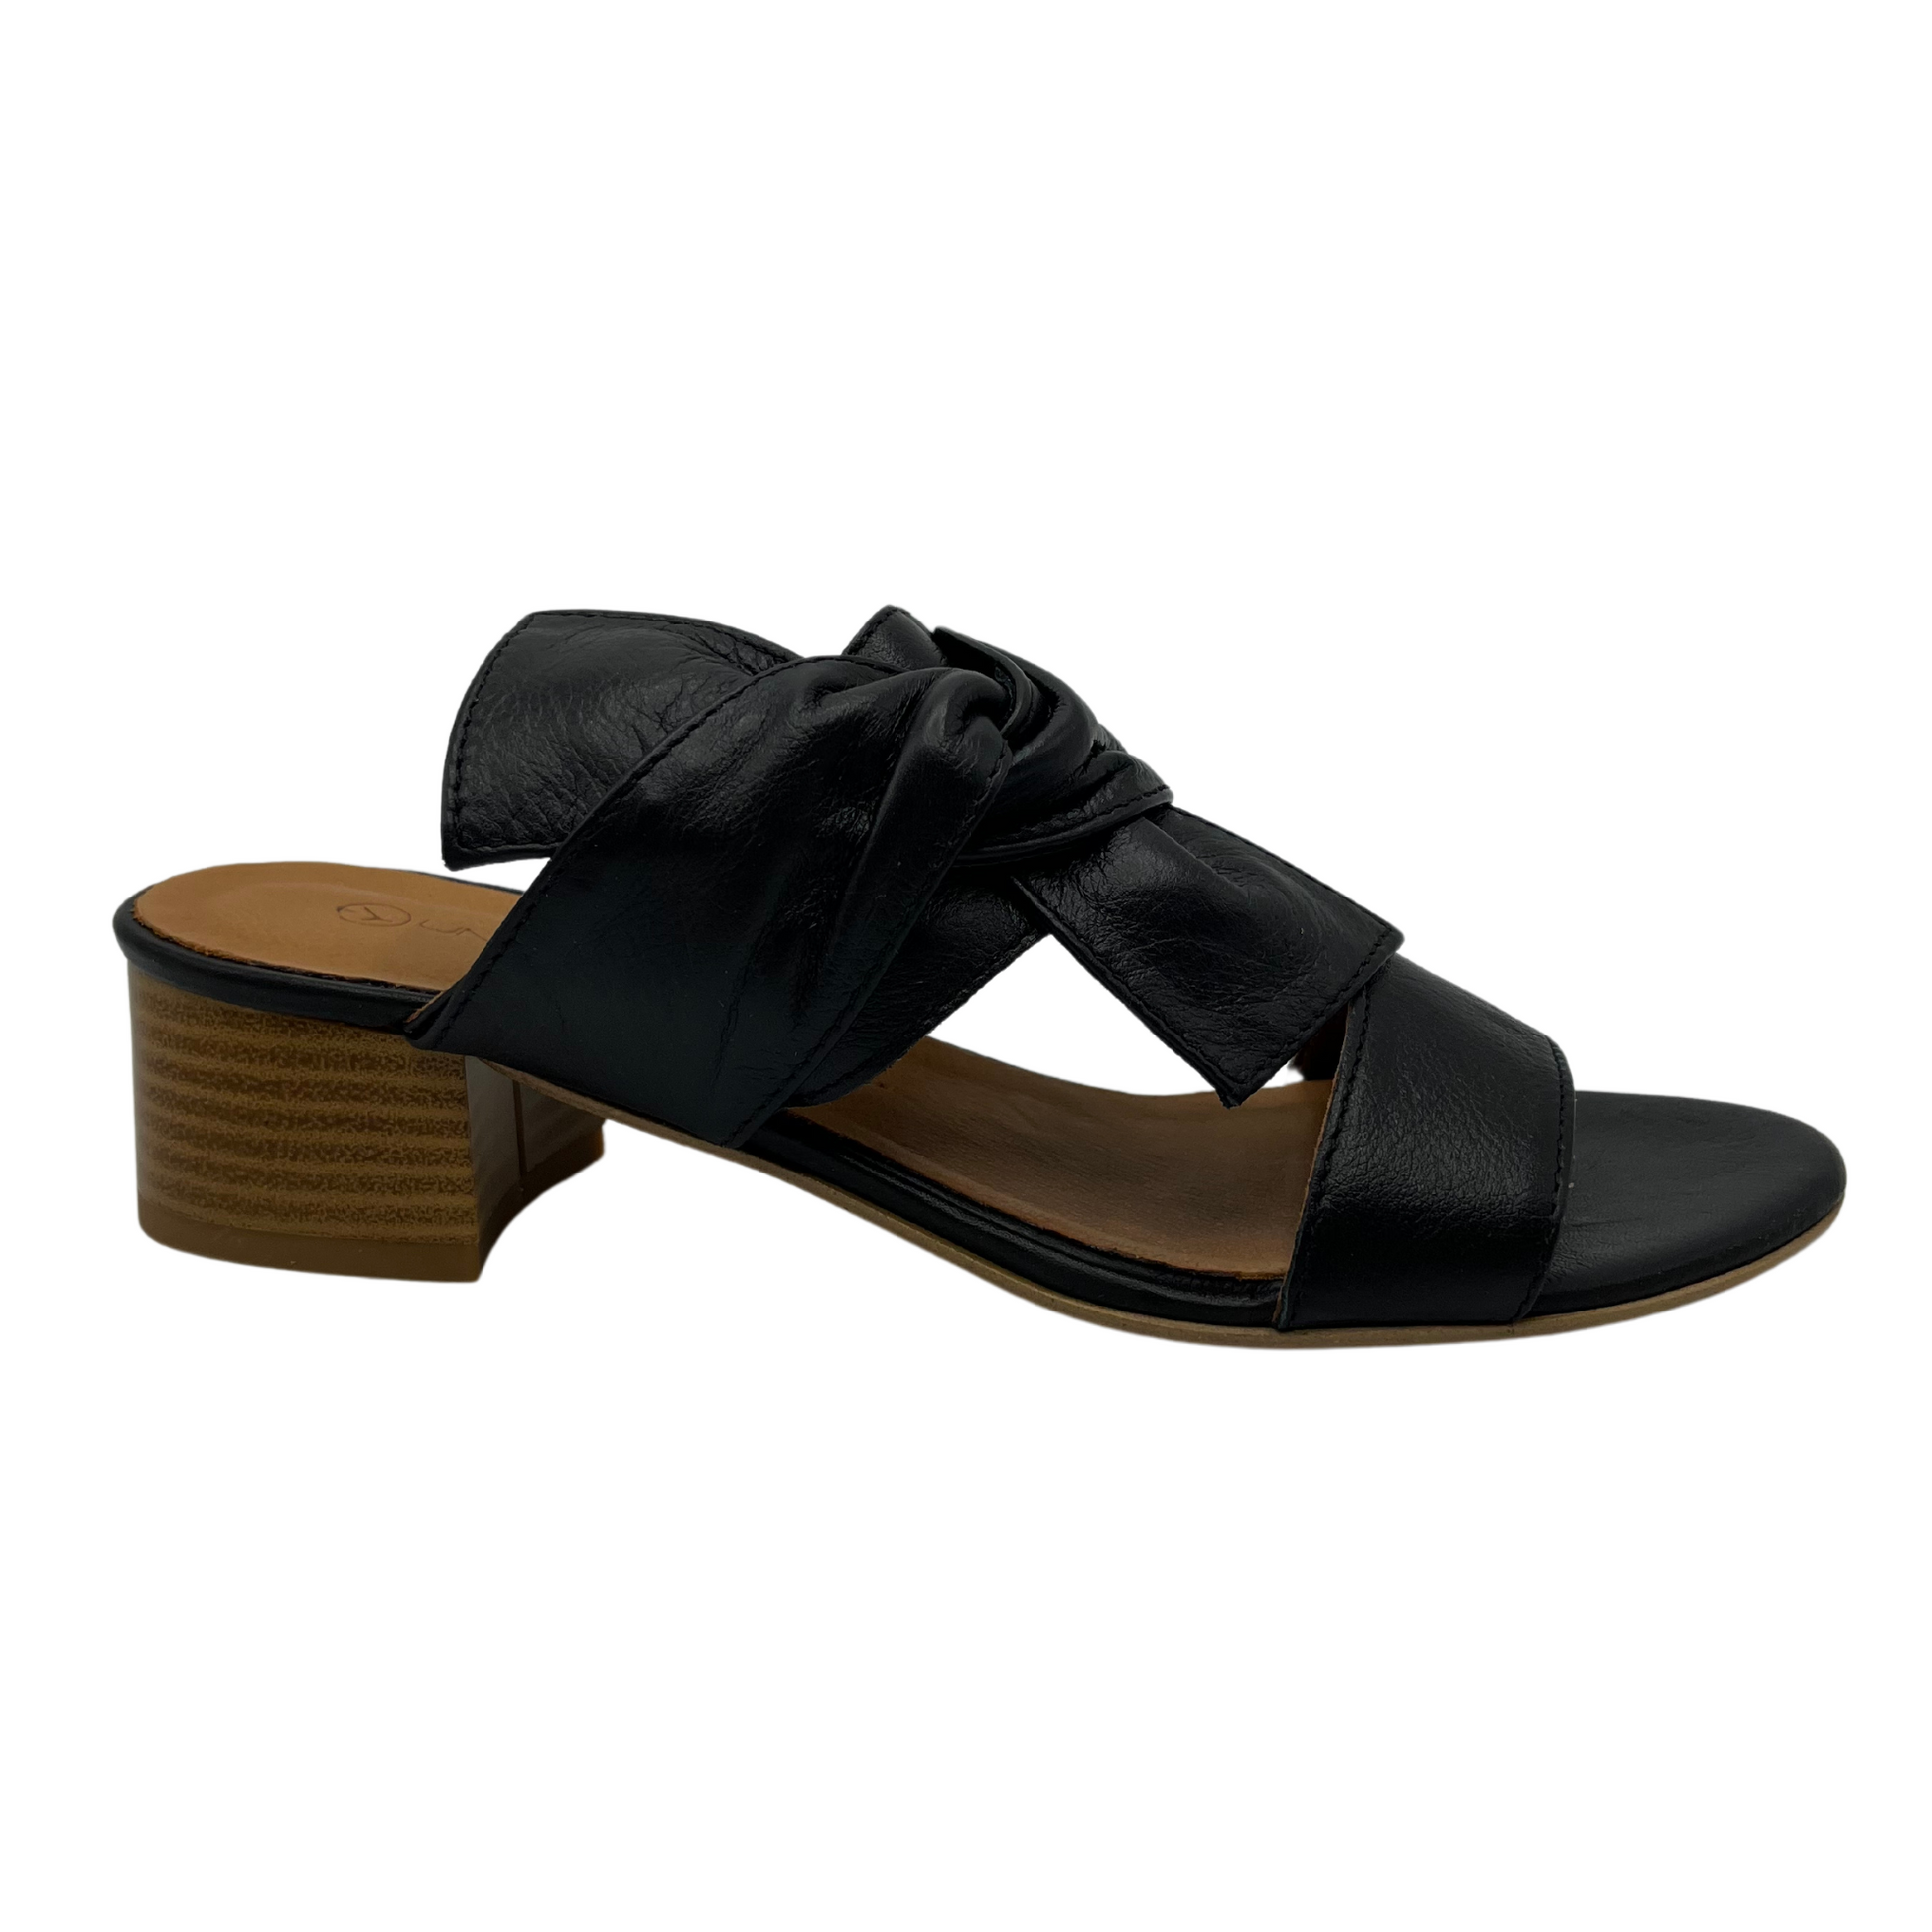 Right facing view of black leather sandal with block heel and knot detail.